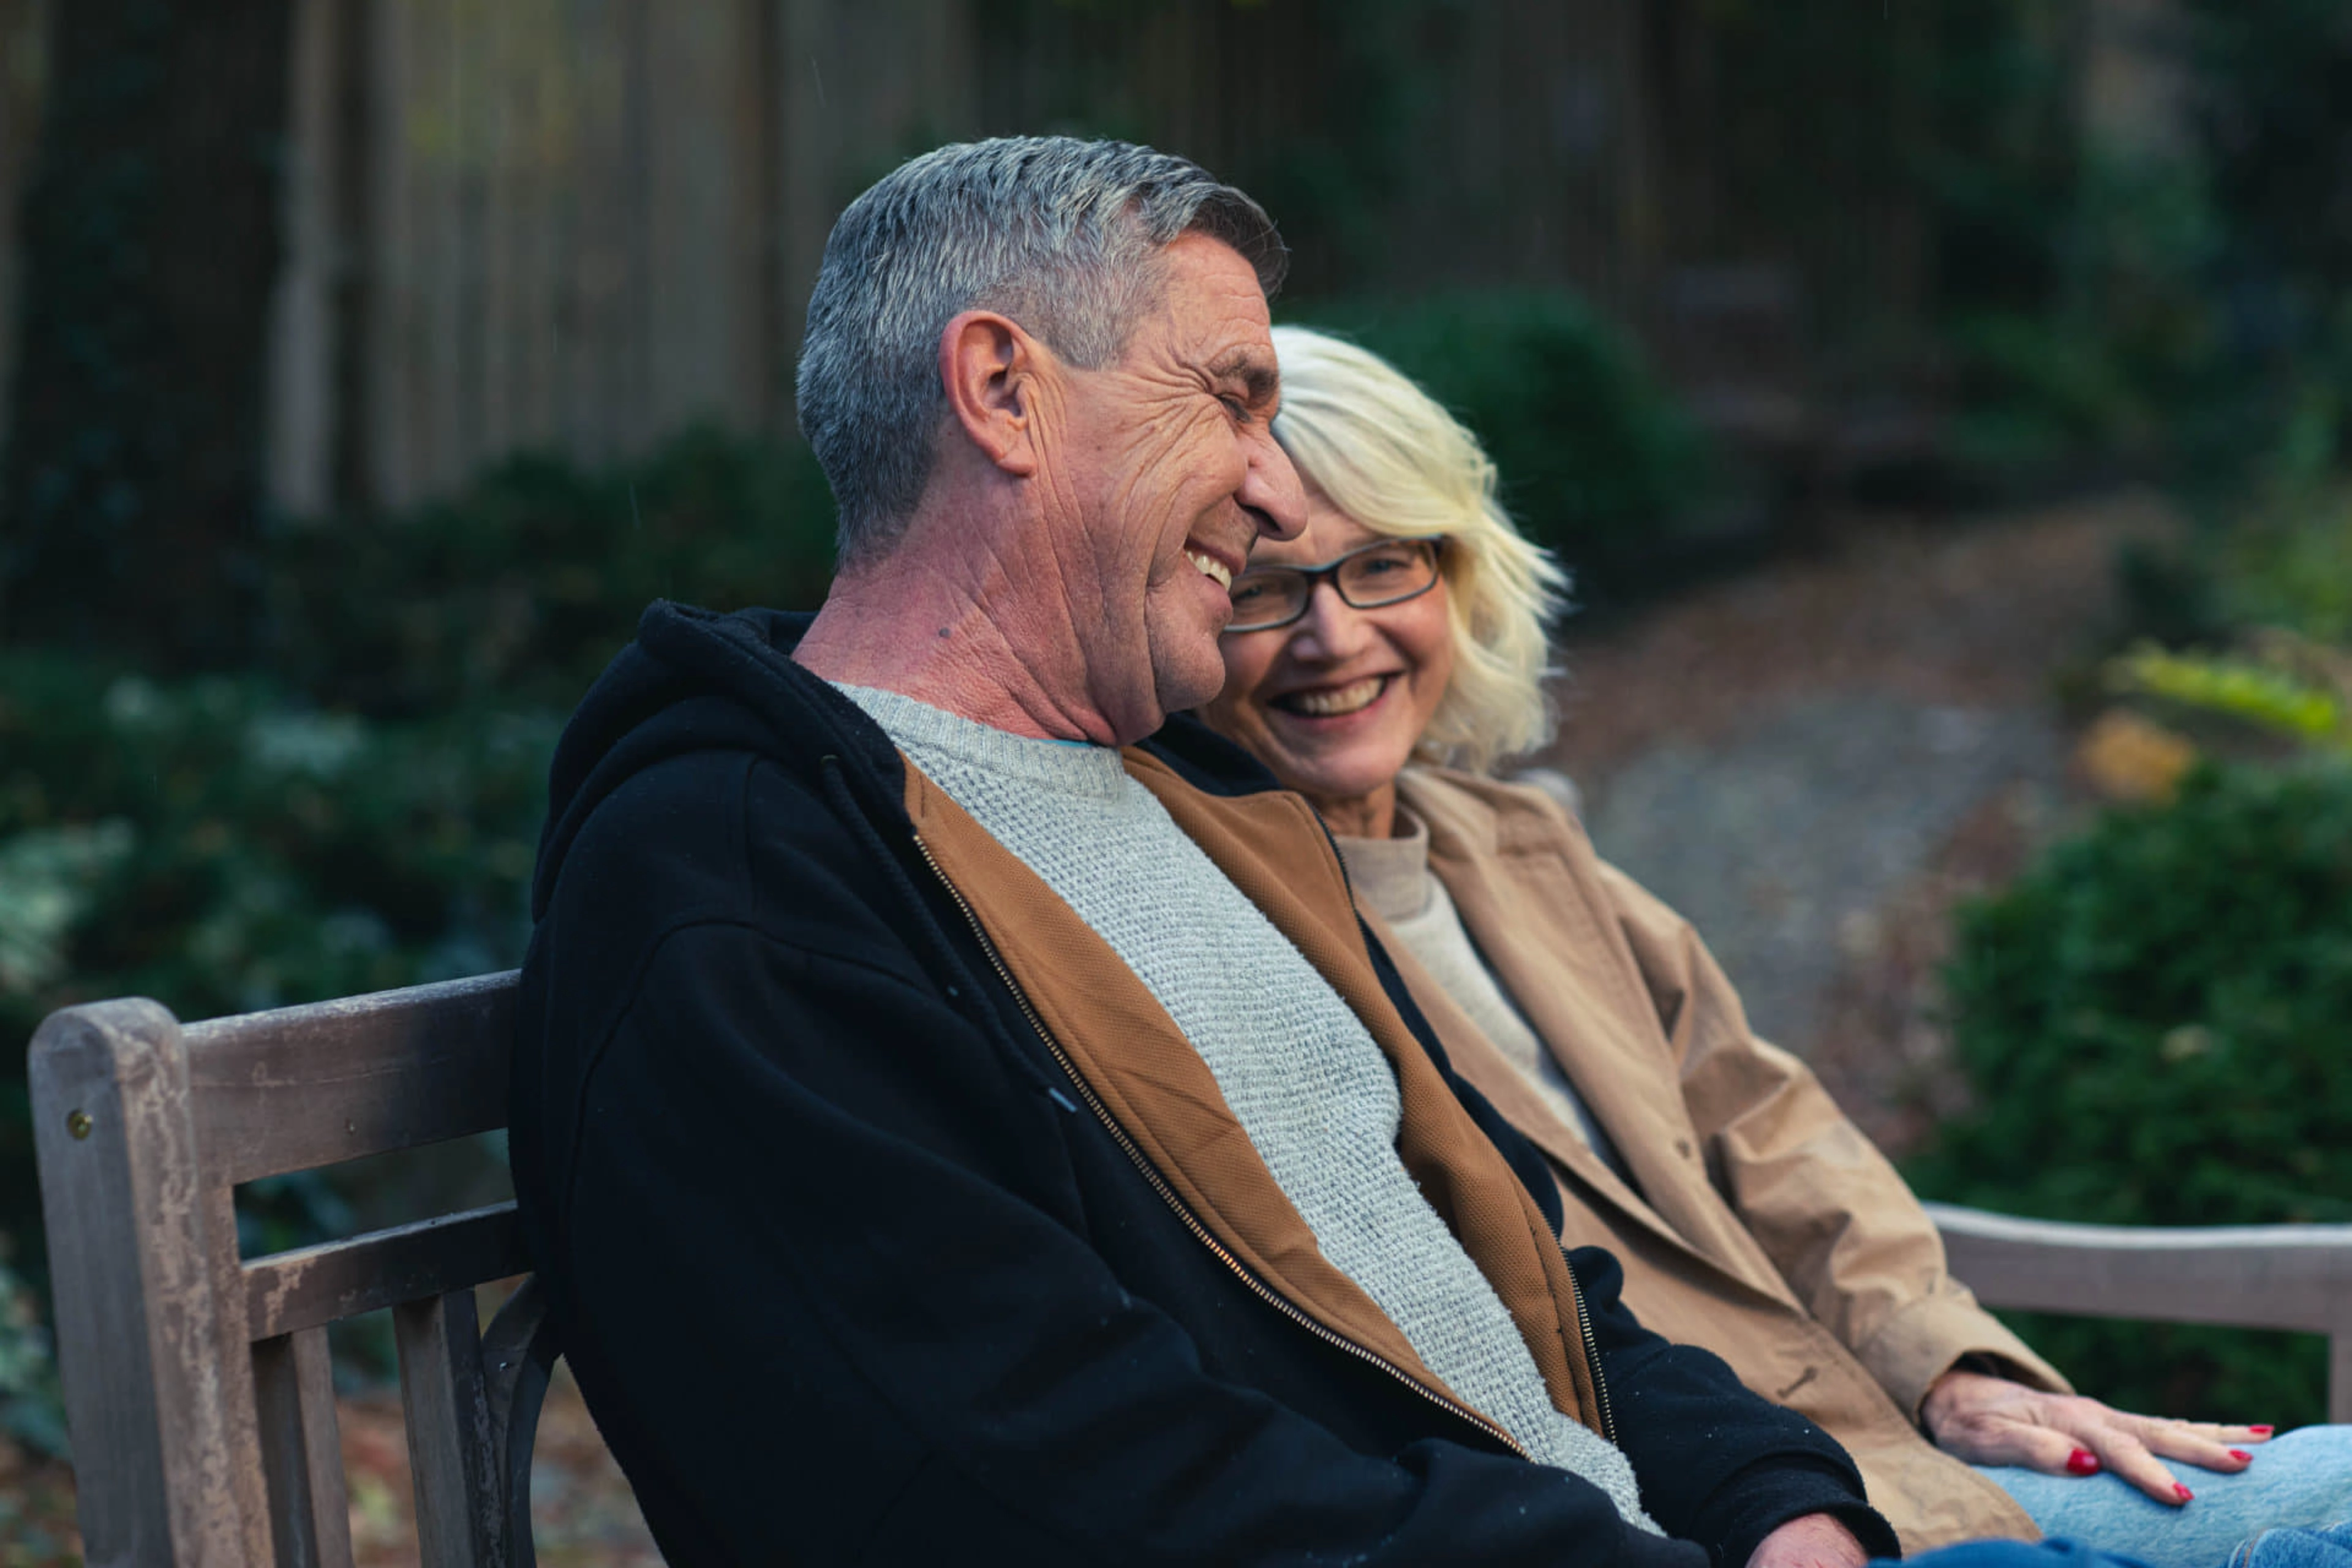 An older couple sitting on a bench